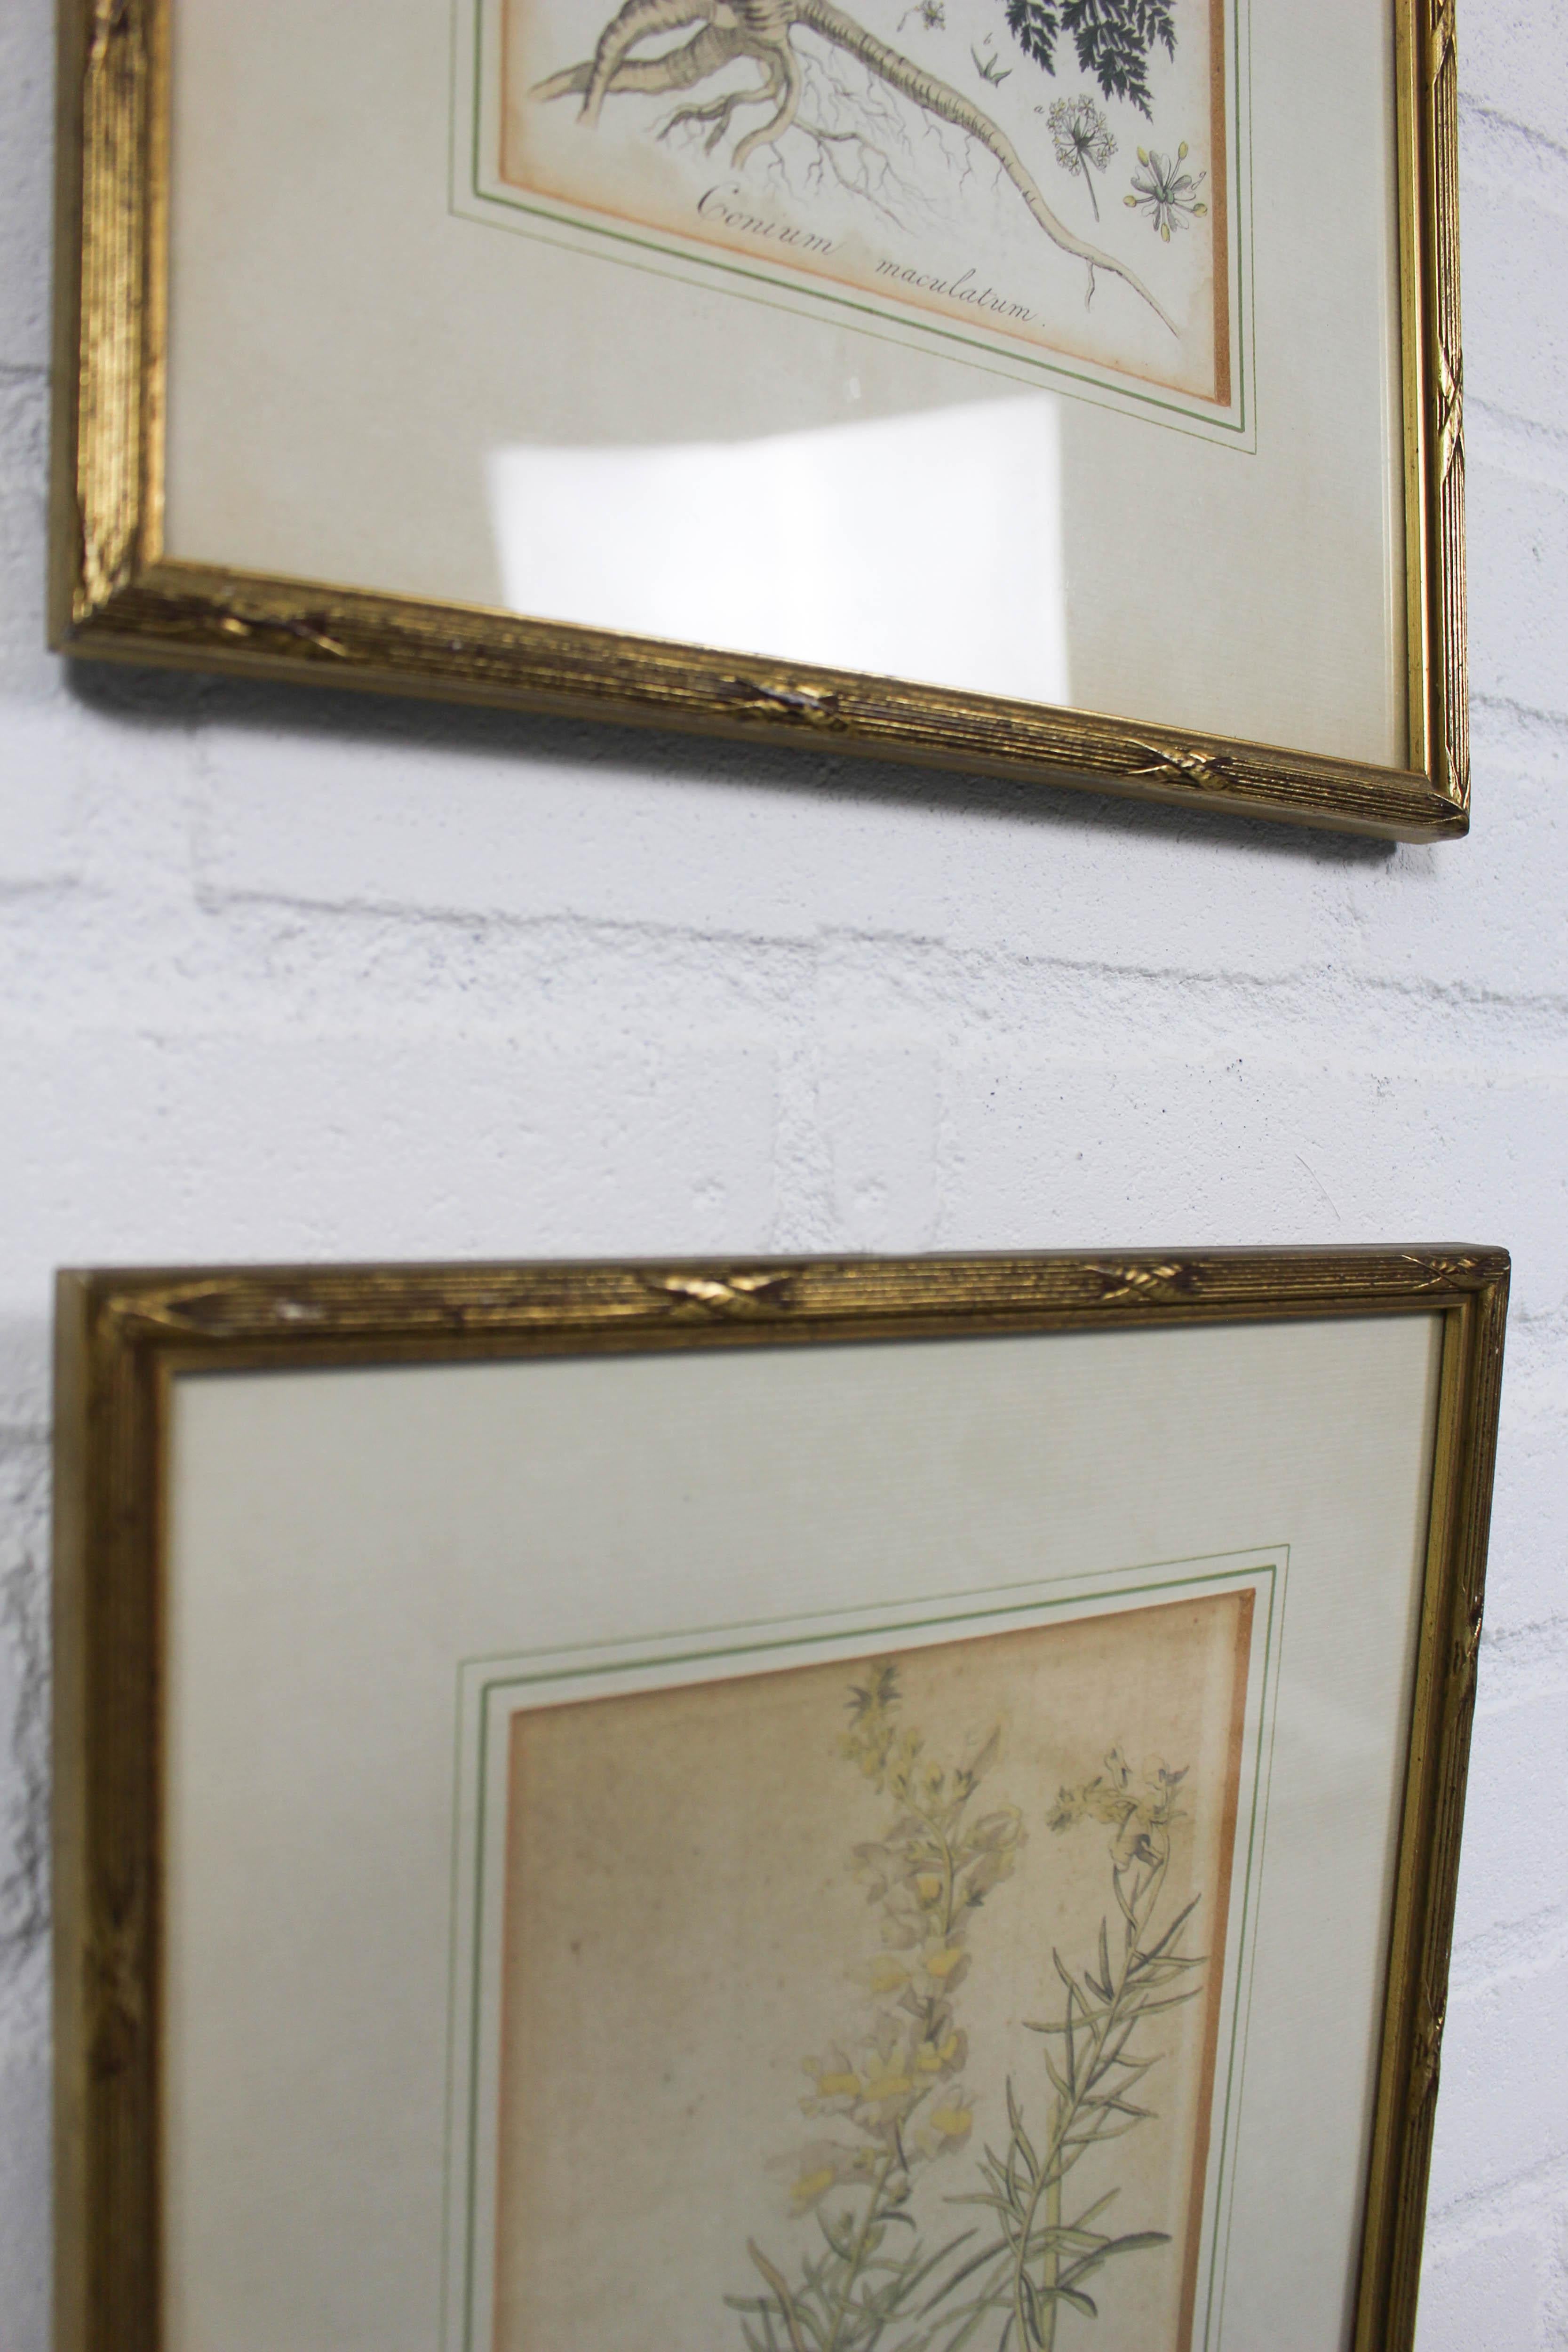 Early 19th Century Set of 3 Copperplate Engravings from the Famous Book 